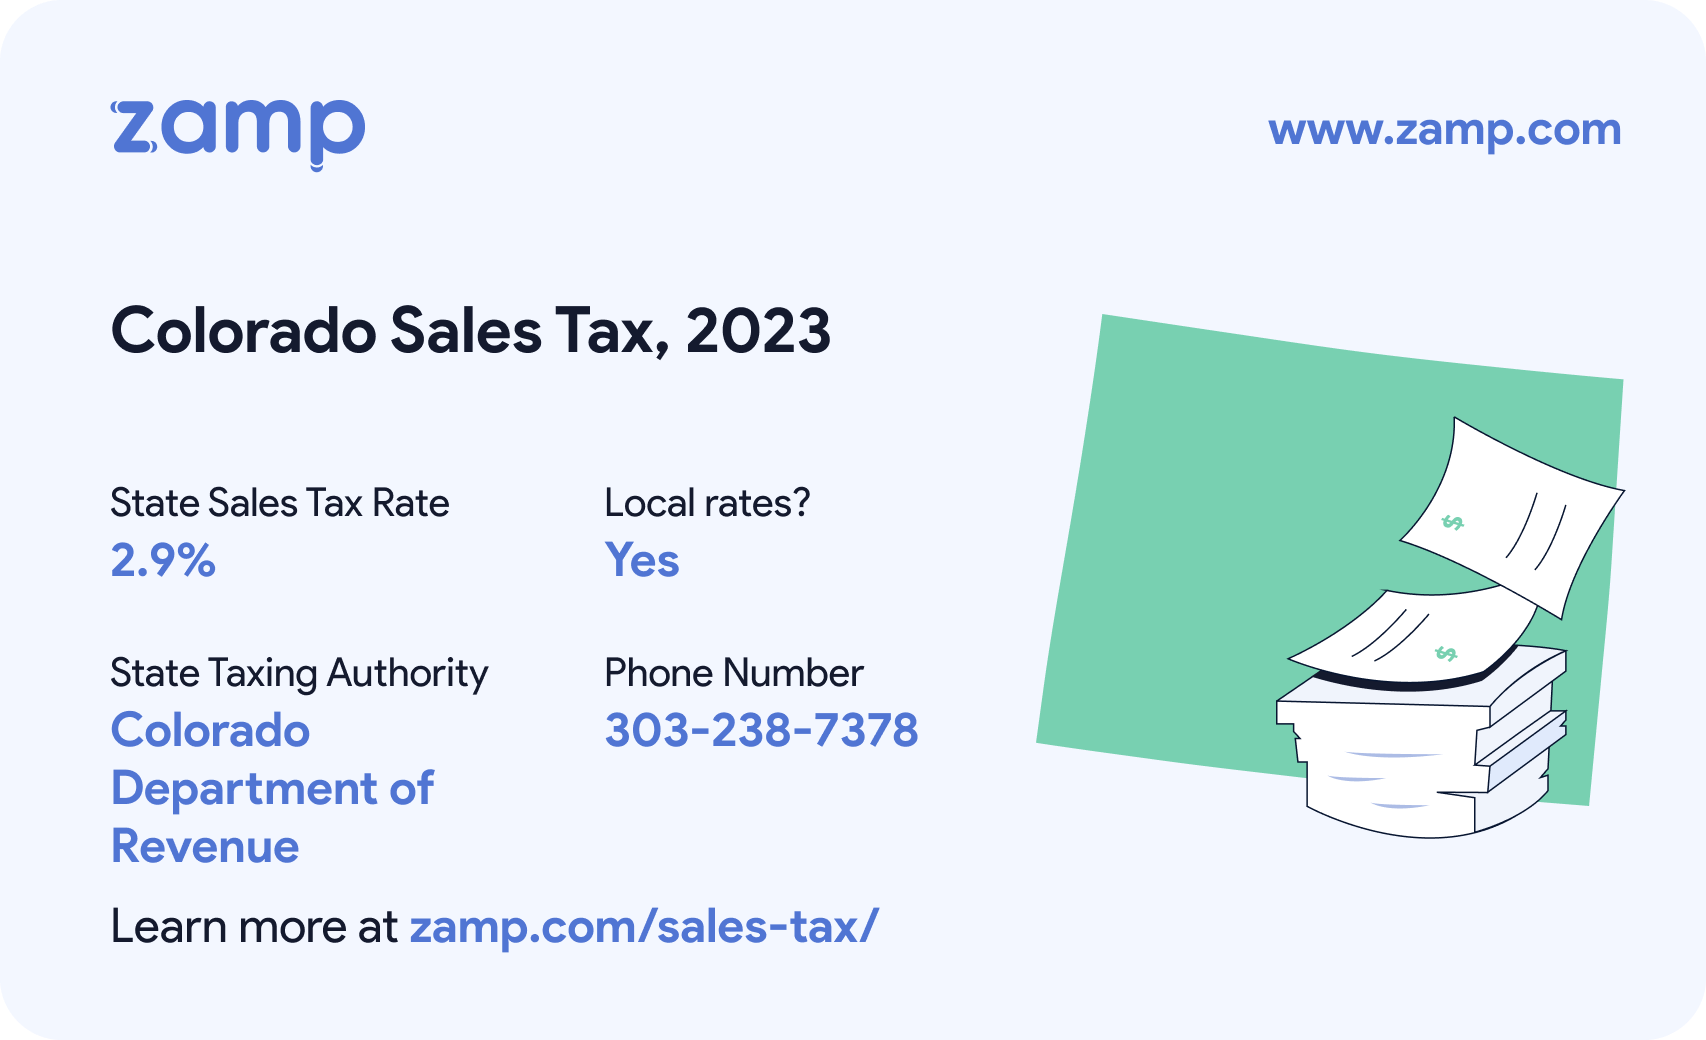 Colorado basic sales tax info for 2023 - State sales tax rate: 2.9%, Local rates? Yes; State Taxing Authority: Colorado Department of Revenue; and phone number 303-238-7378